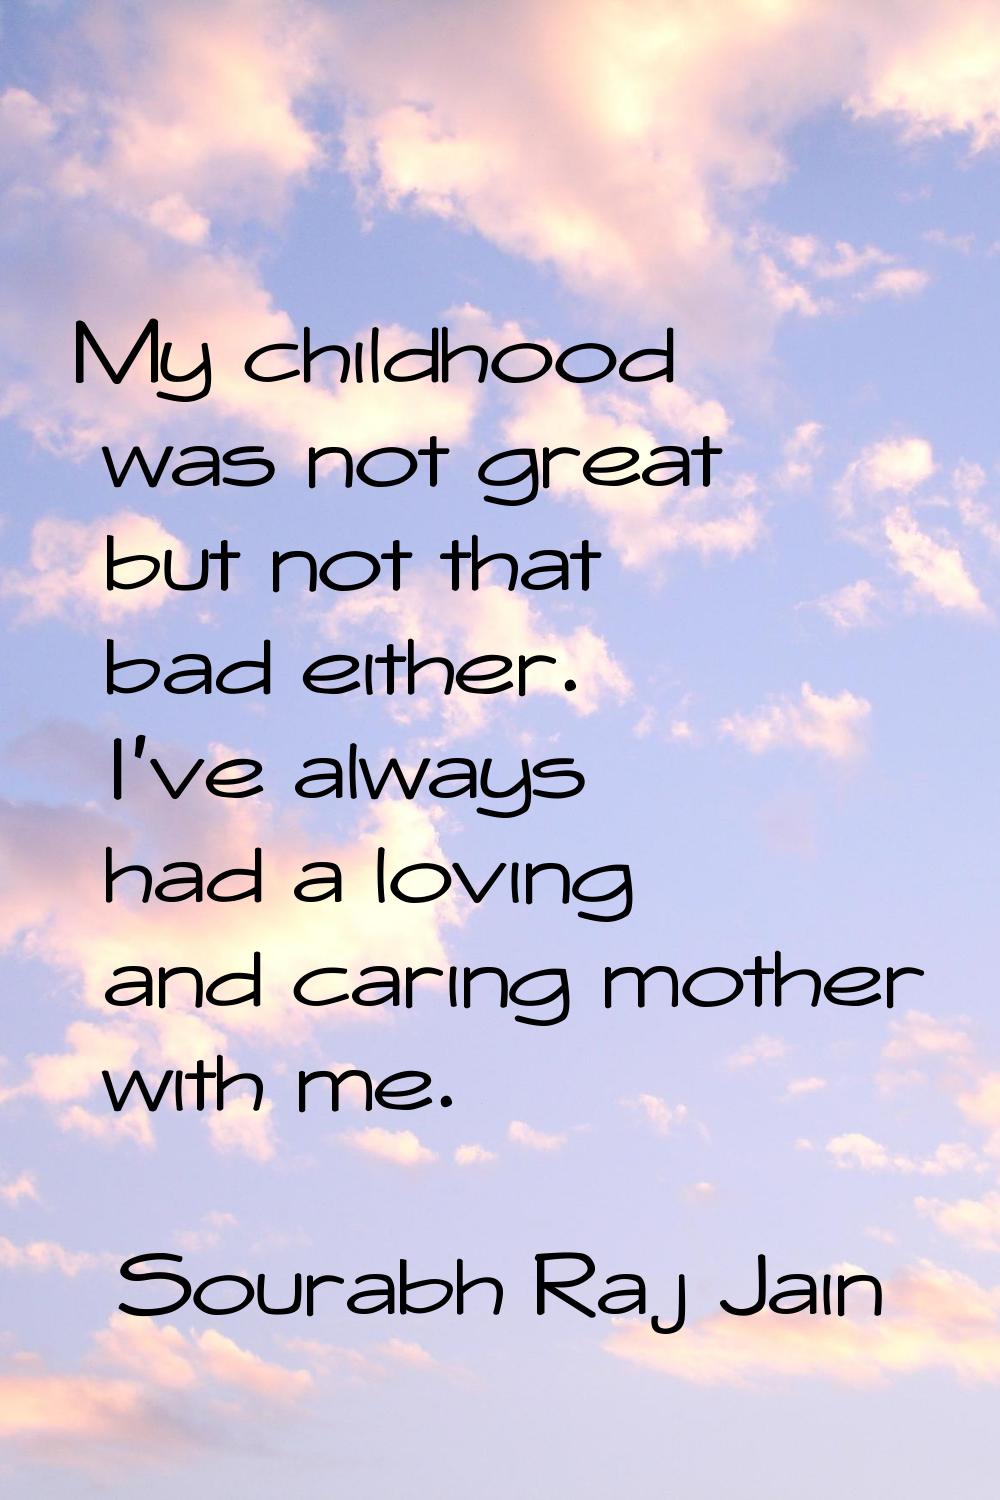 My childhood was not great but not that bad either. I've always had a loving and caring mother with